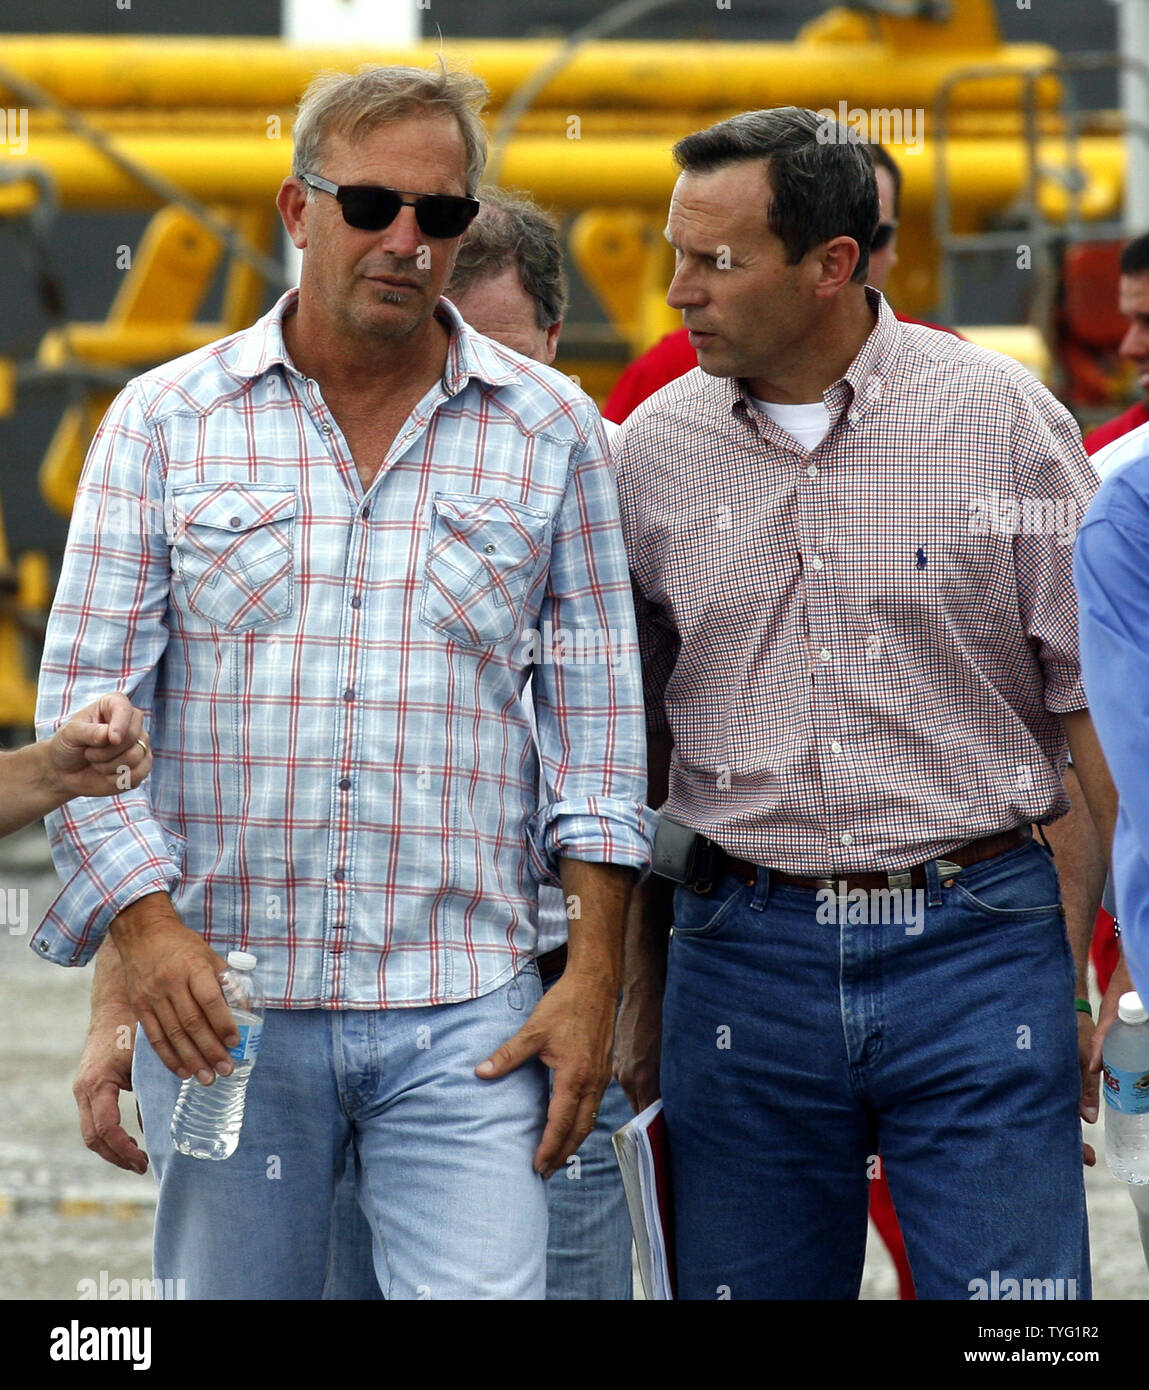 Kevin Costner, left, actor and founding partner of Ocean Therapy, listens to Doug Suttles,  chief operating officer of BP Exploration and Production, before a press conference in Port Fourchon, Louisiana, June 18, 2010. BP has purchased a centrifuge from Ocean Therapy that separates oil and water.   UPI/A.J. Sisco.. Stock Photo